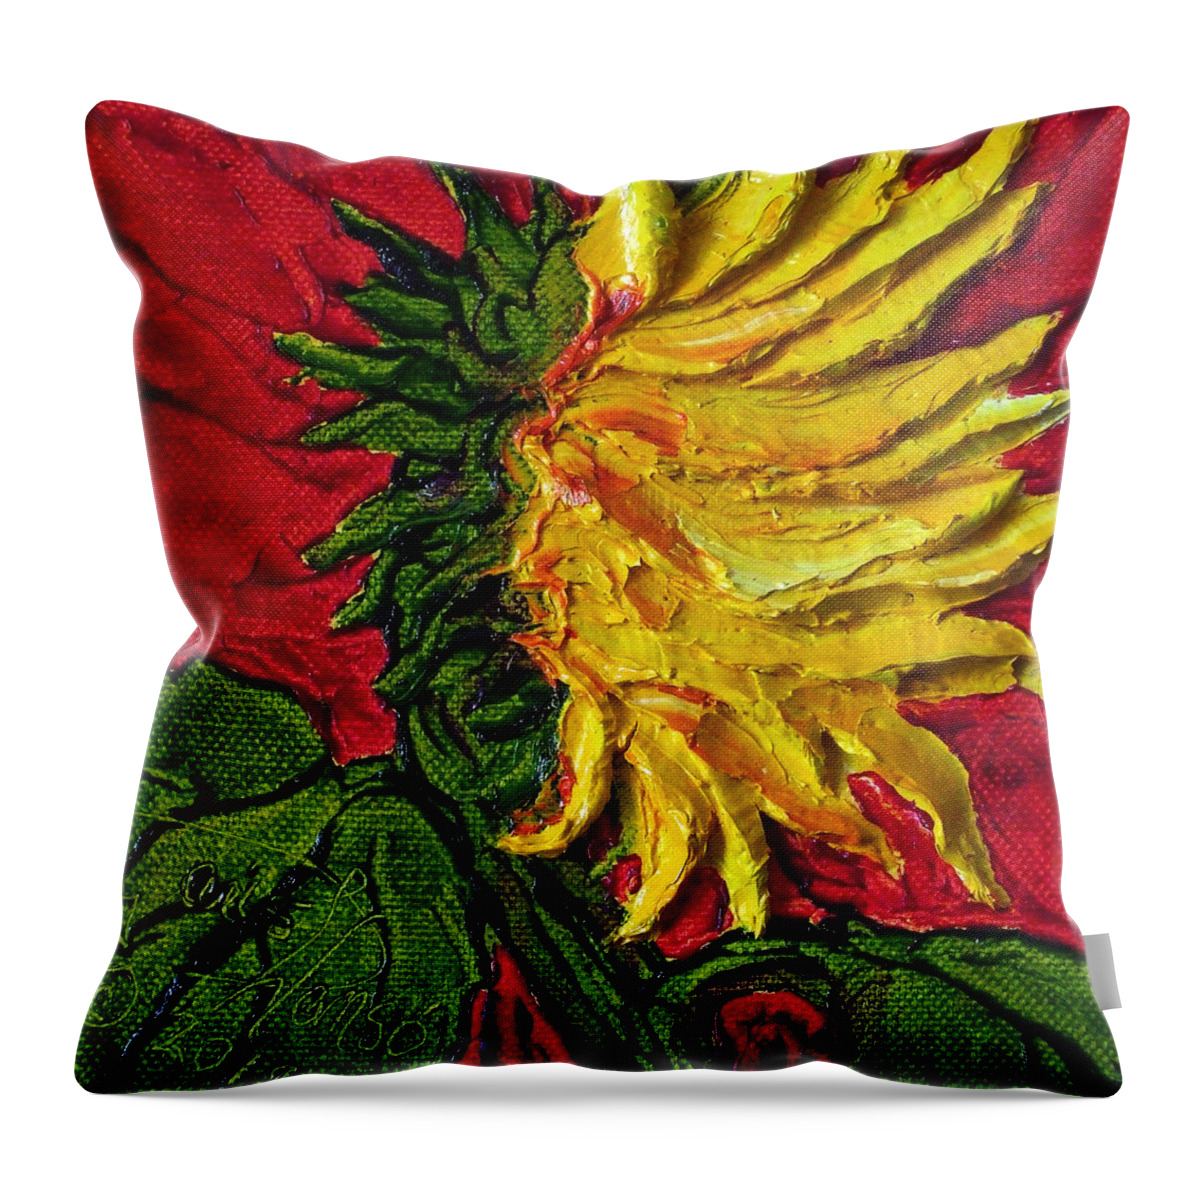 Red Throw Pillow featuring the painting Yellow Sunflower on Red by Paris Wyatt Llanso